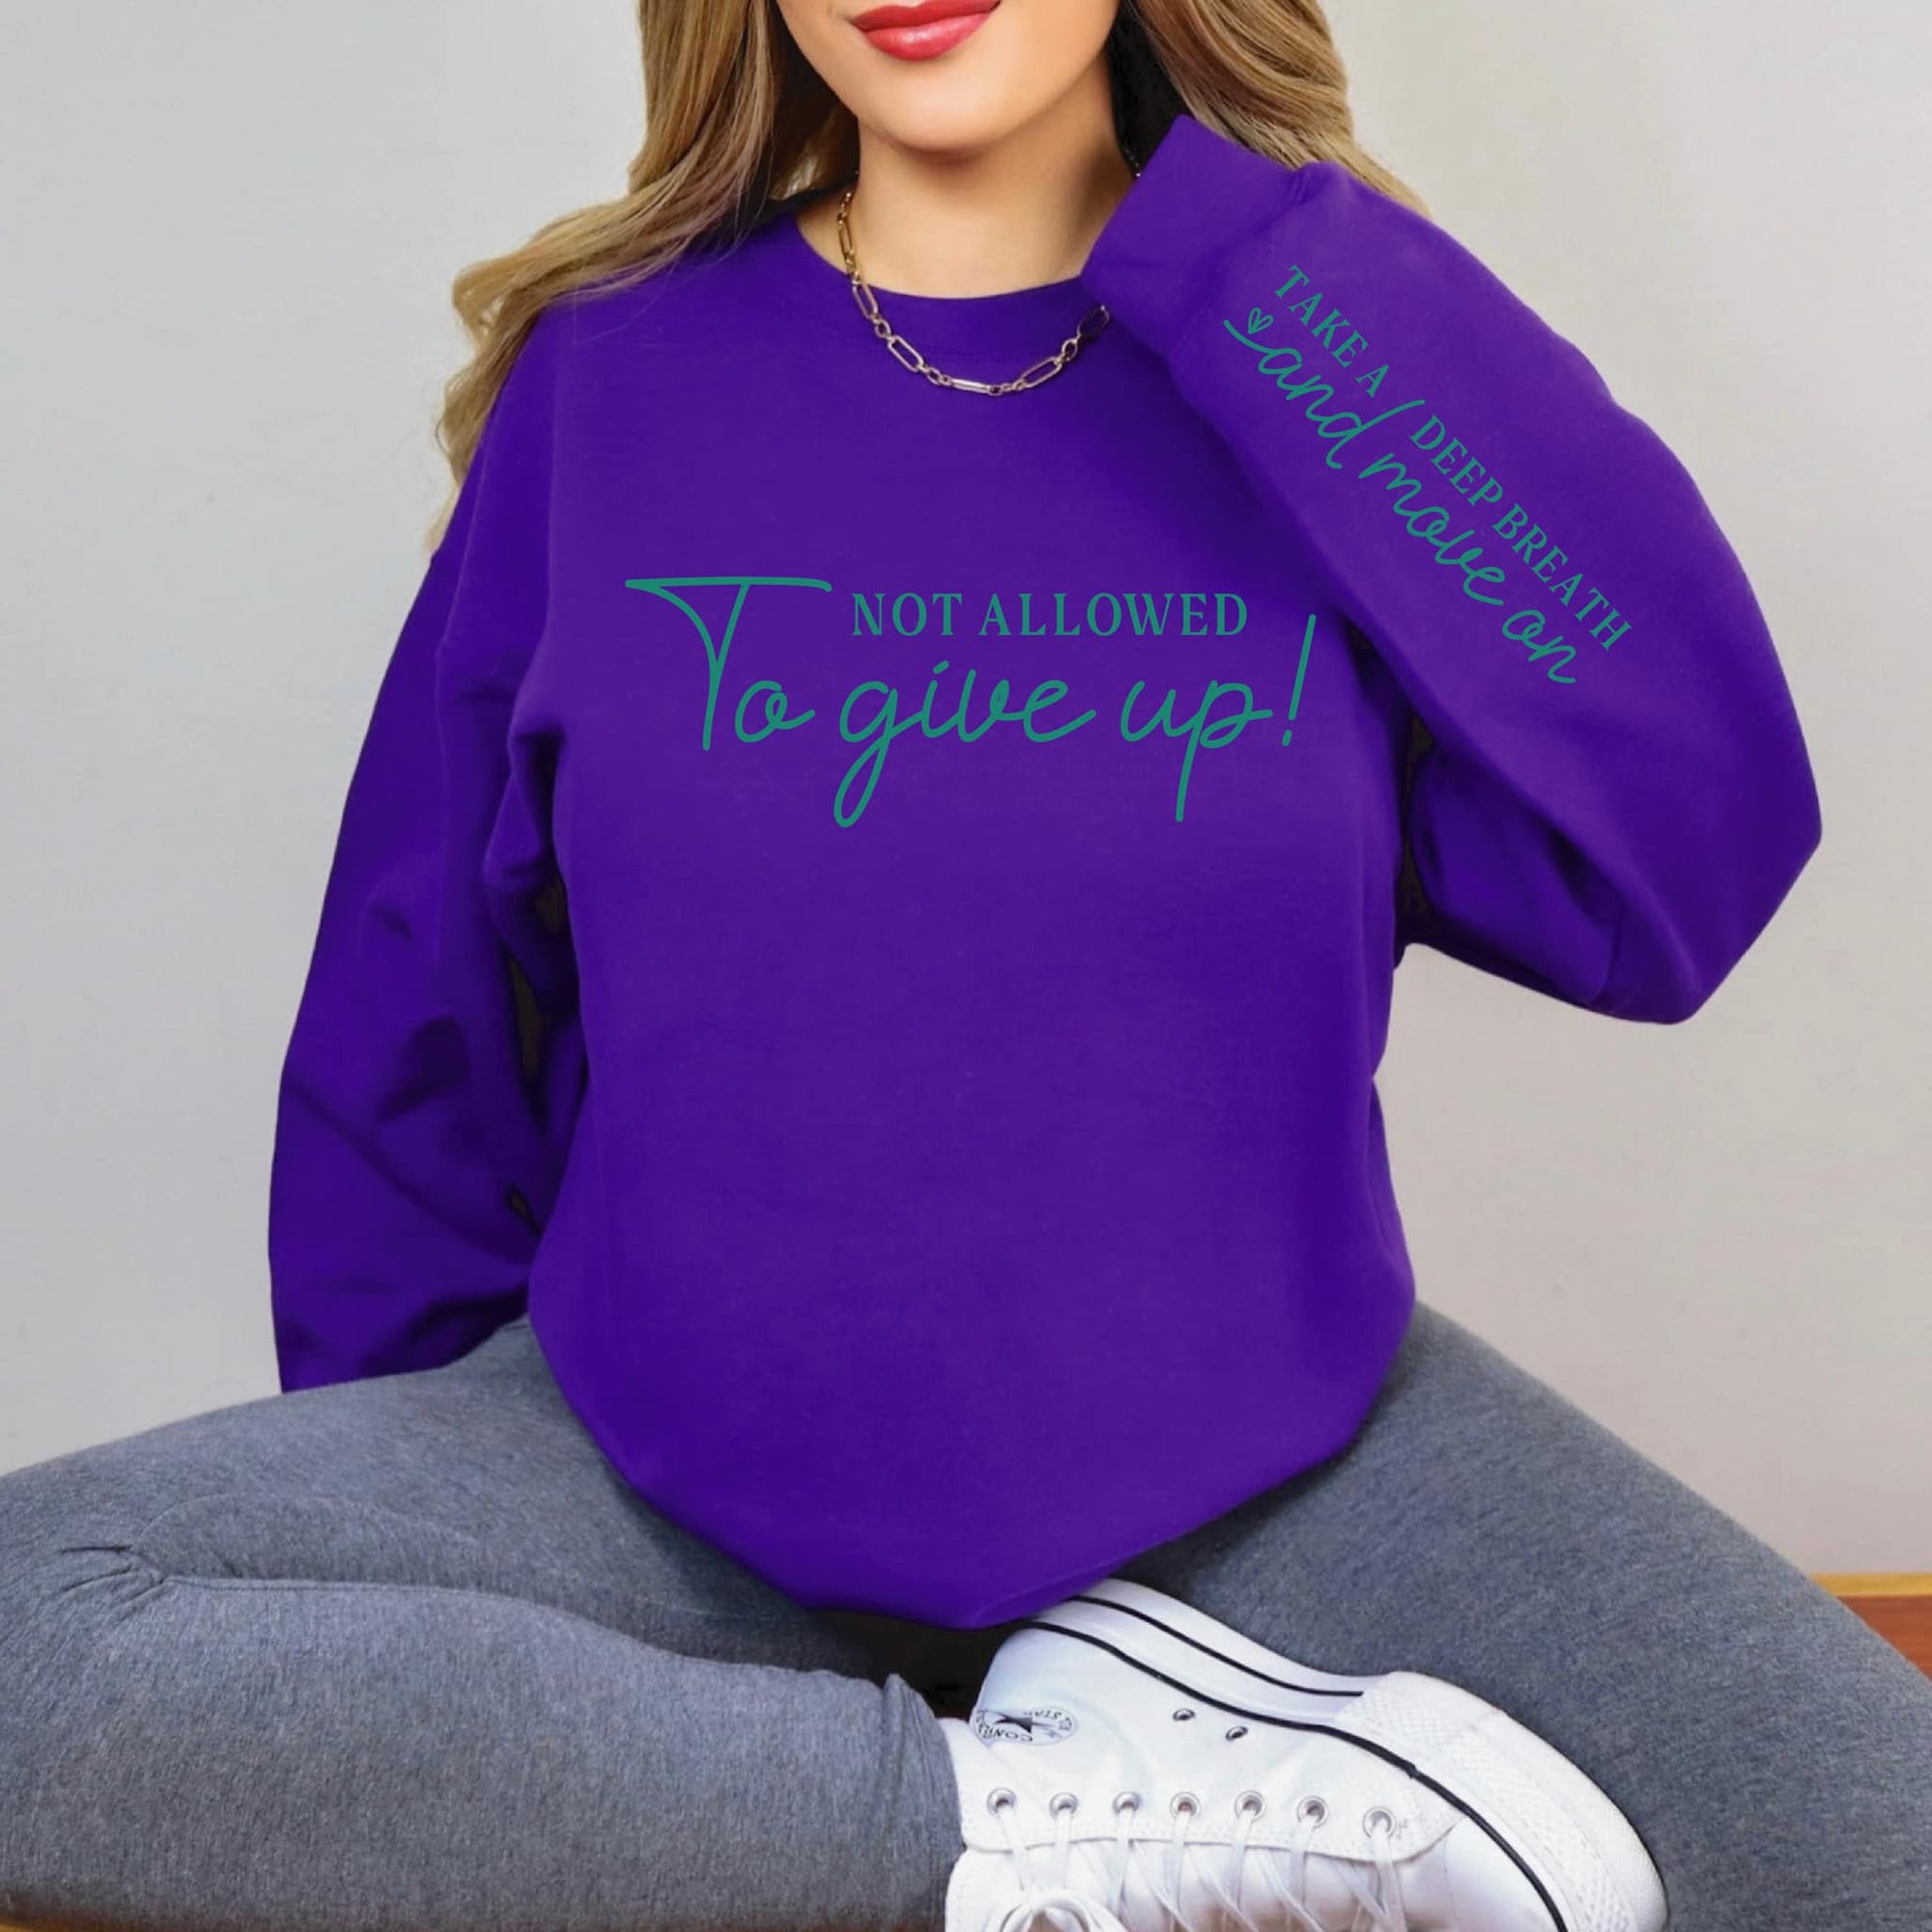 Take A Deep Breath  With  Sleeve Accent Sweatshirt